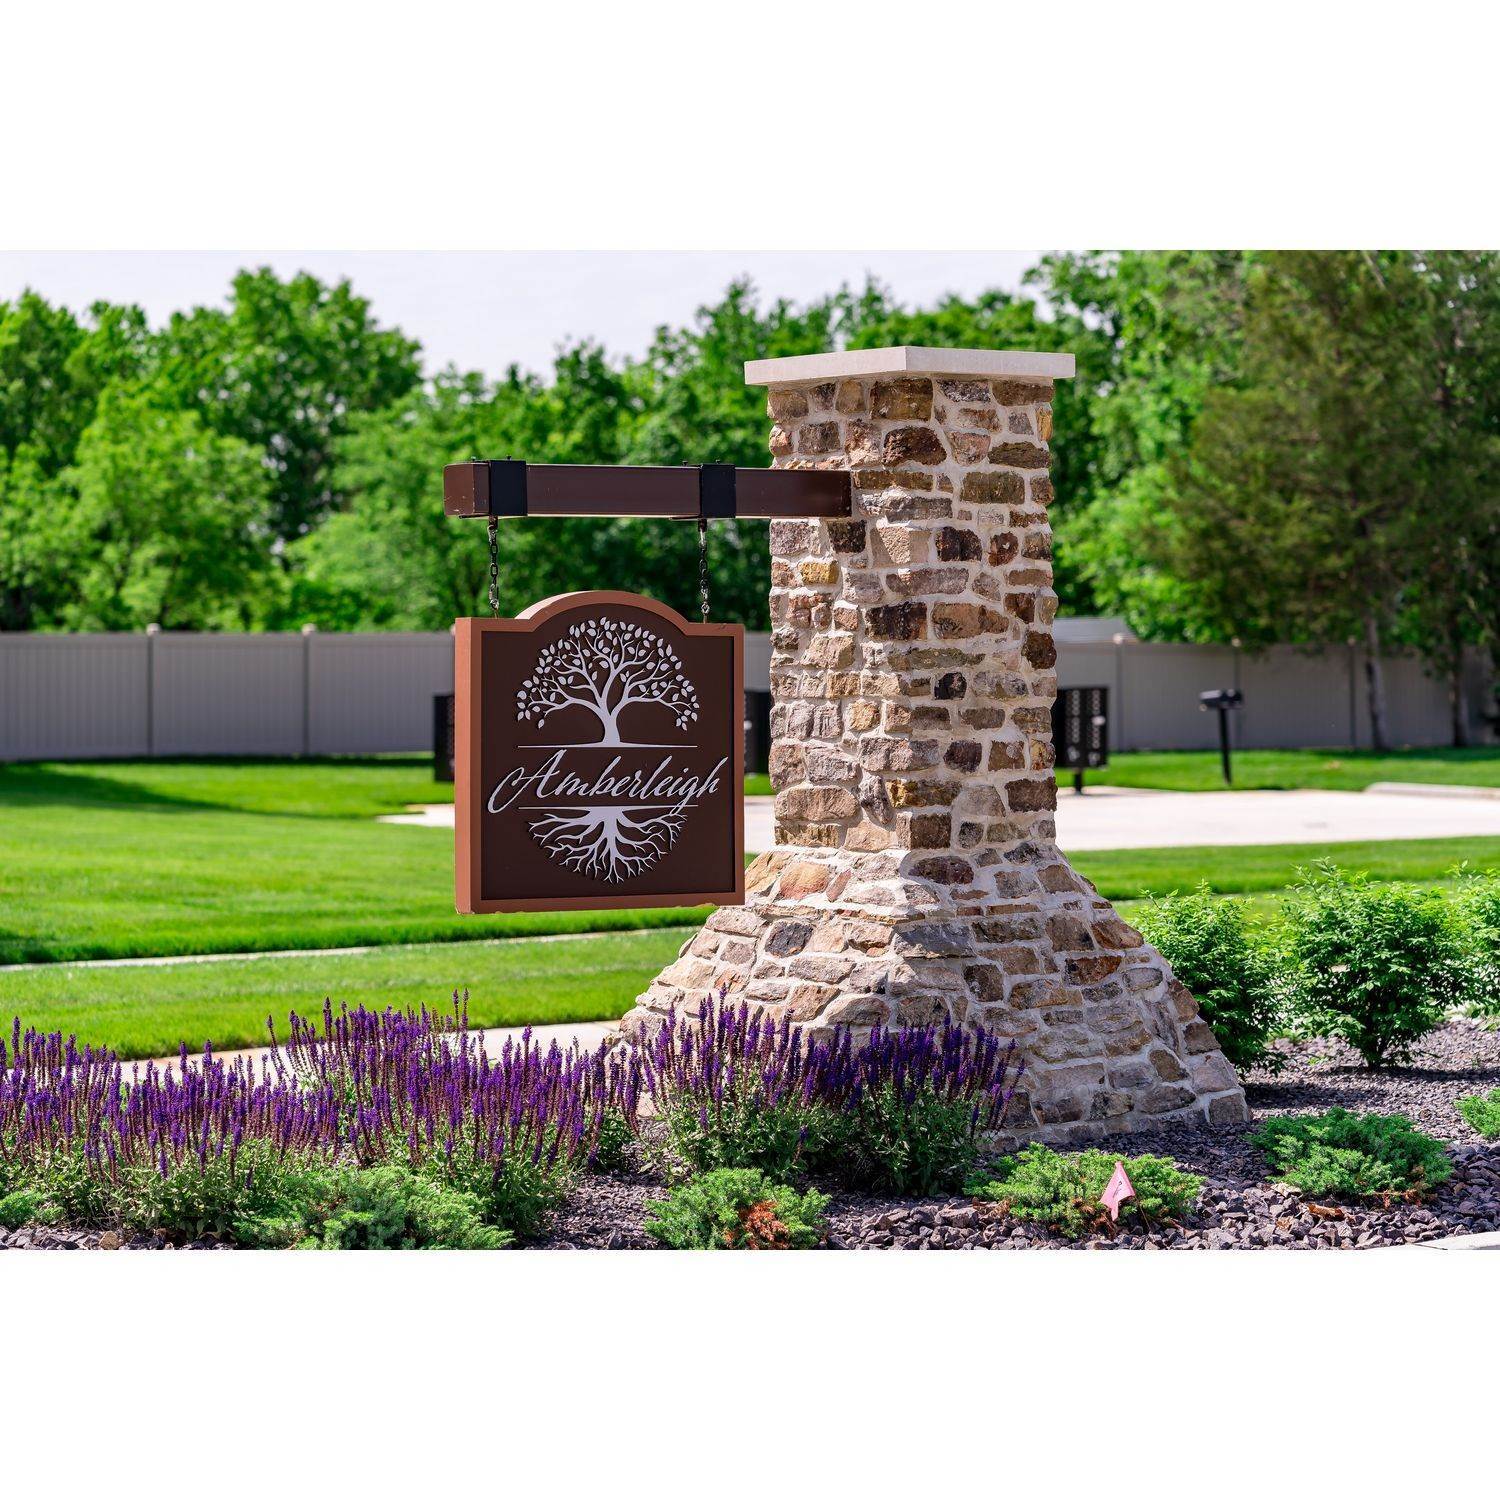 Amberleigh xây dựng tại 202 Cambium Court, Wentzville, MO 63385